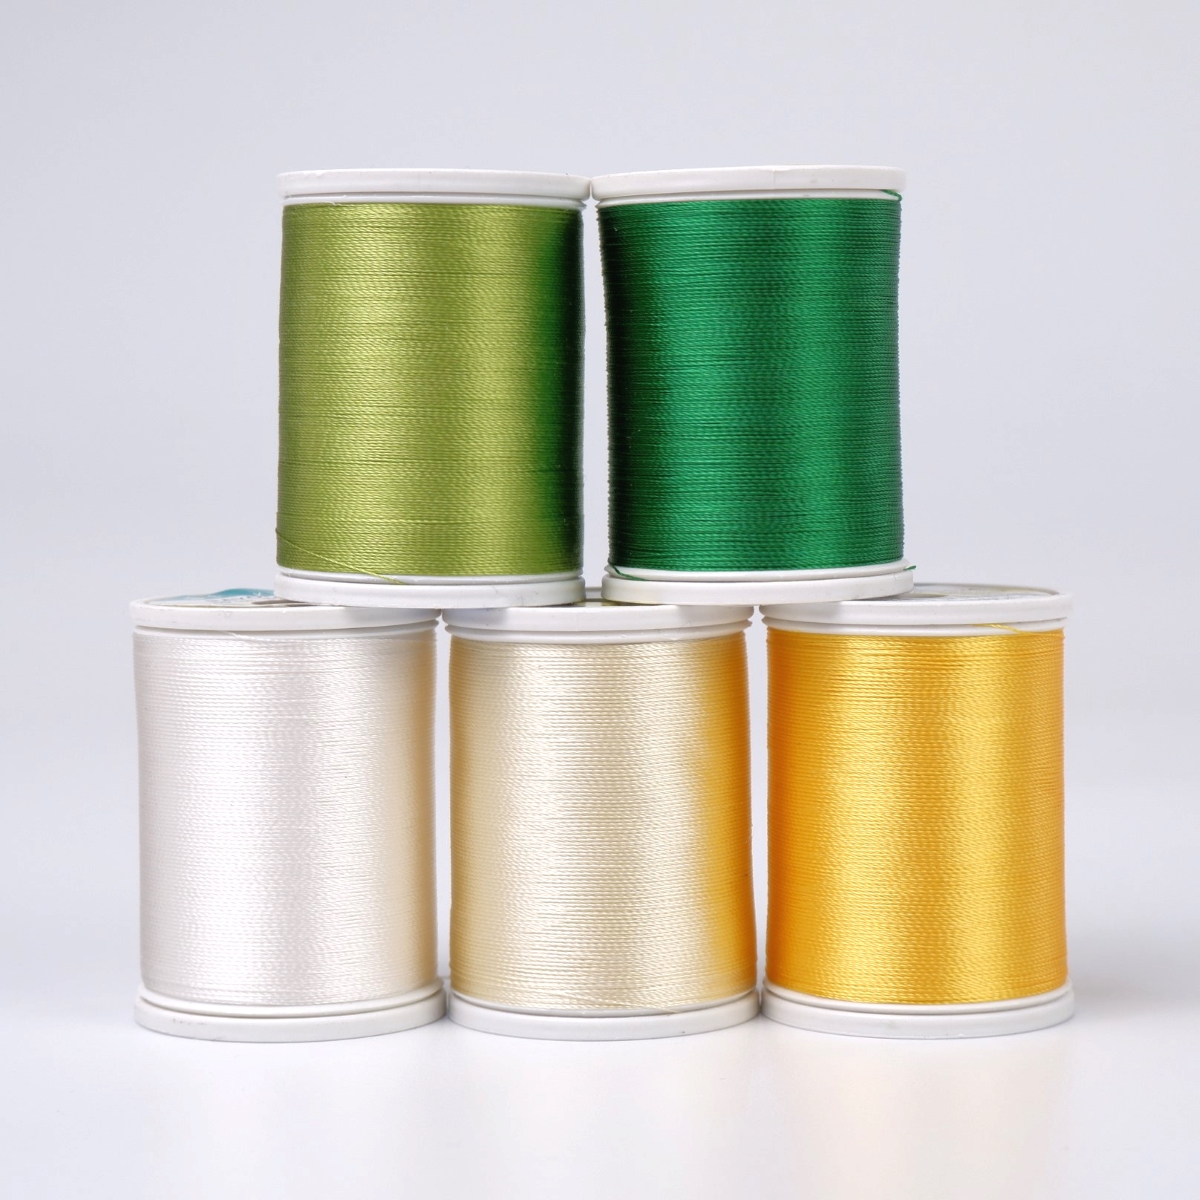 SULKY RAYON 40 - CITRUS AND LIME (5x
780m King Spools)